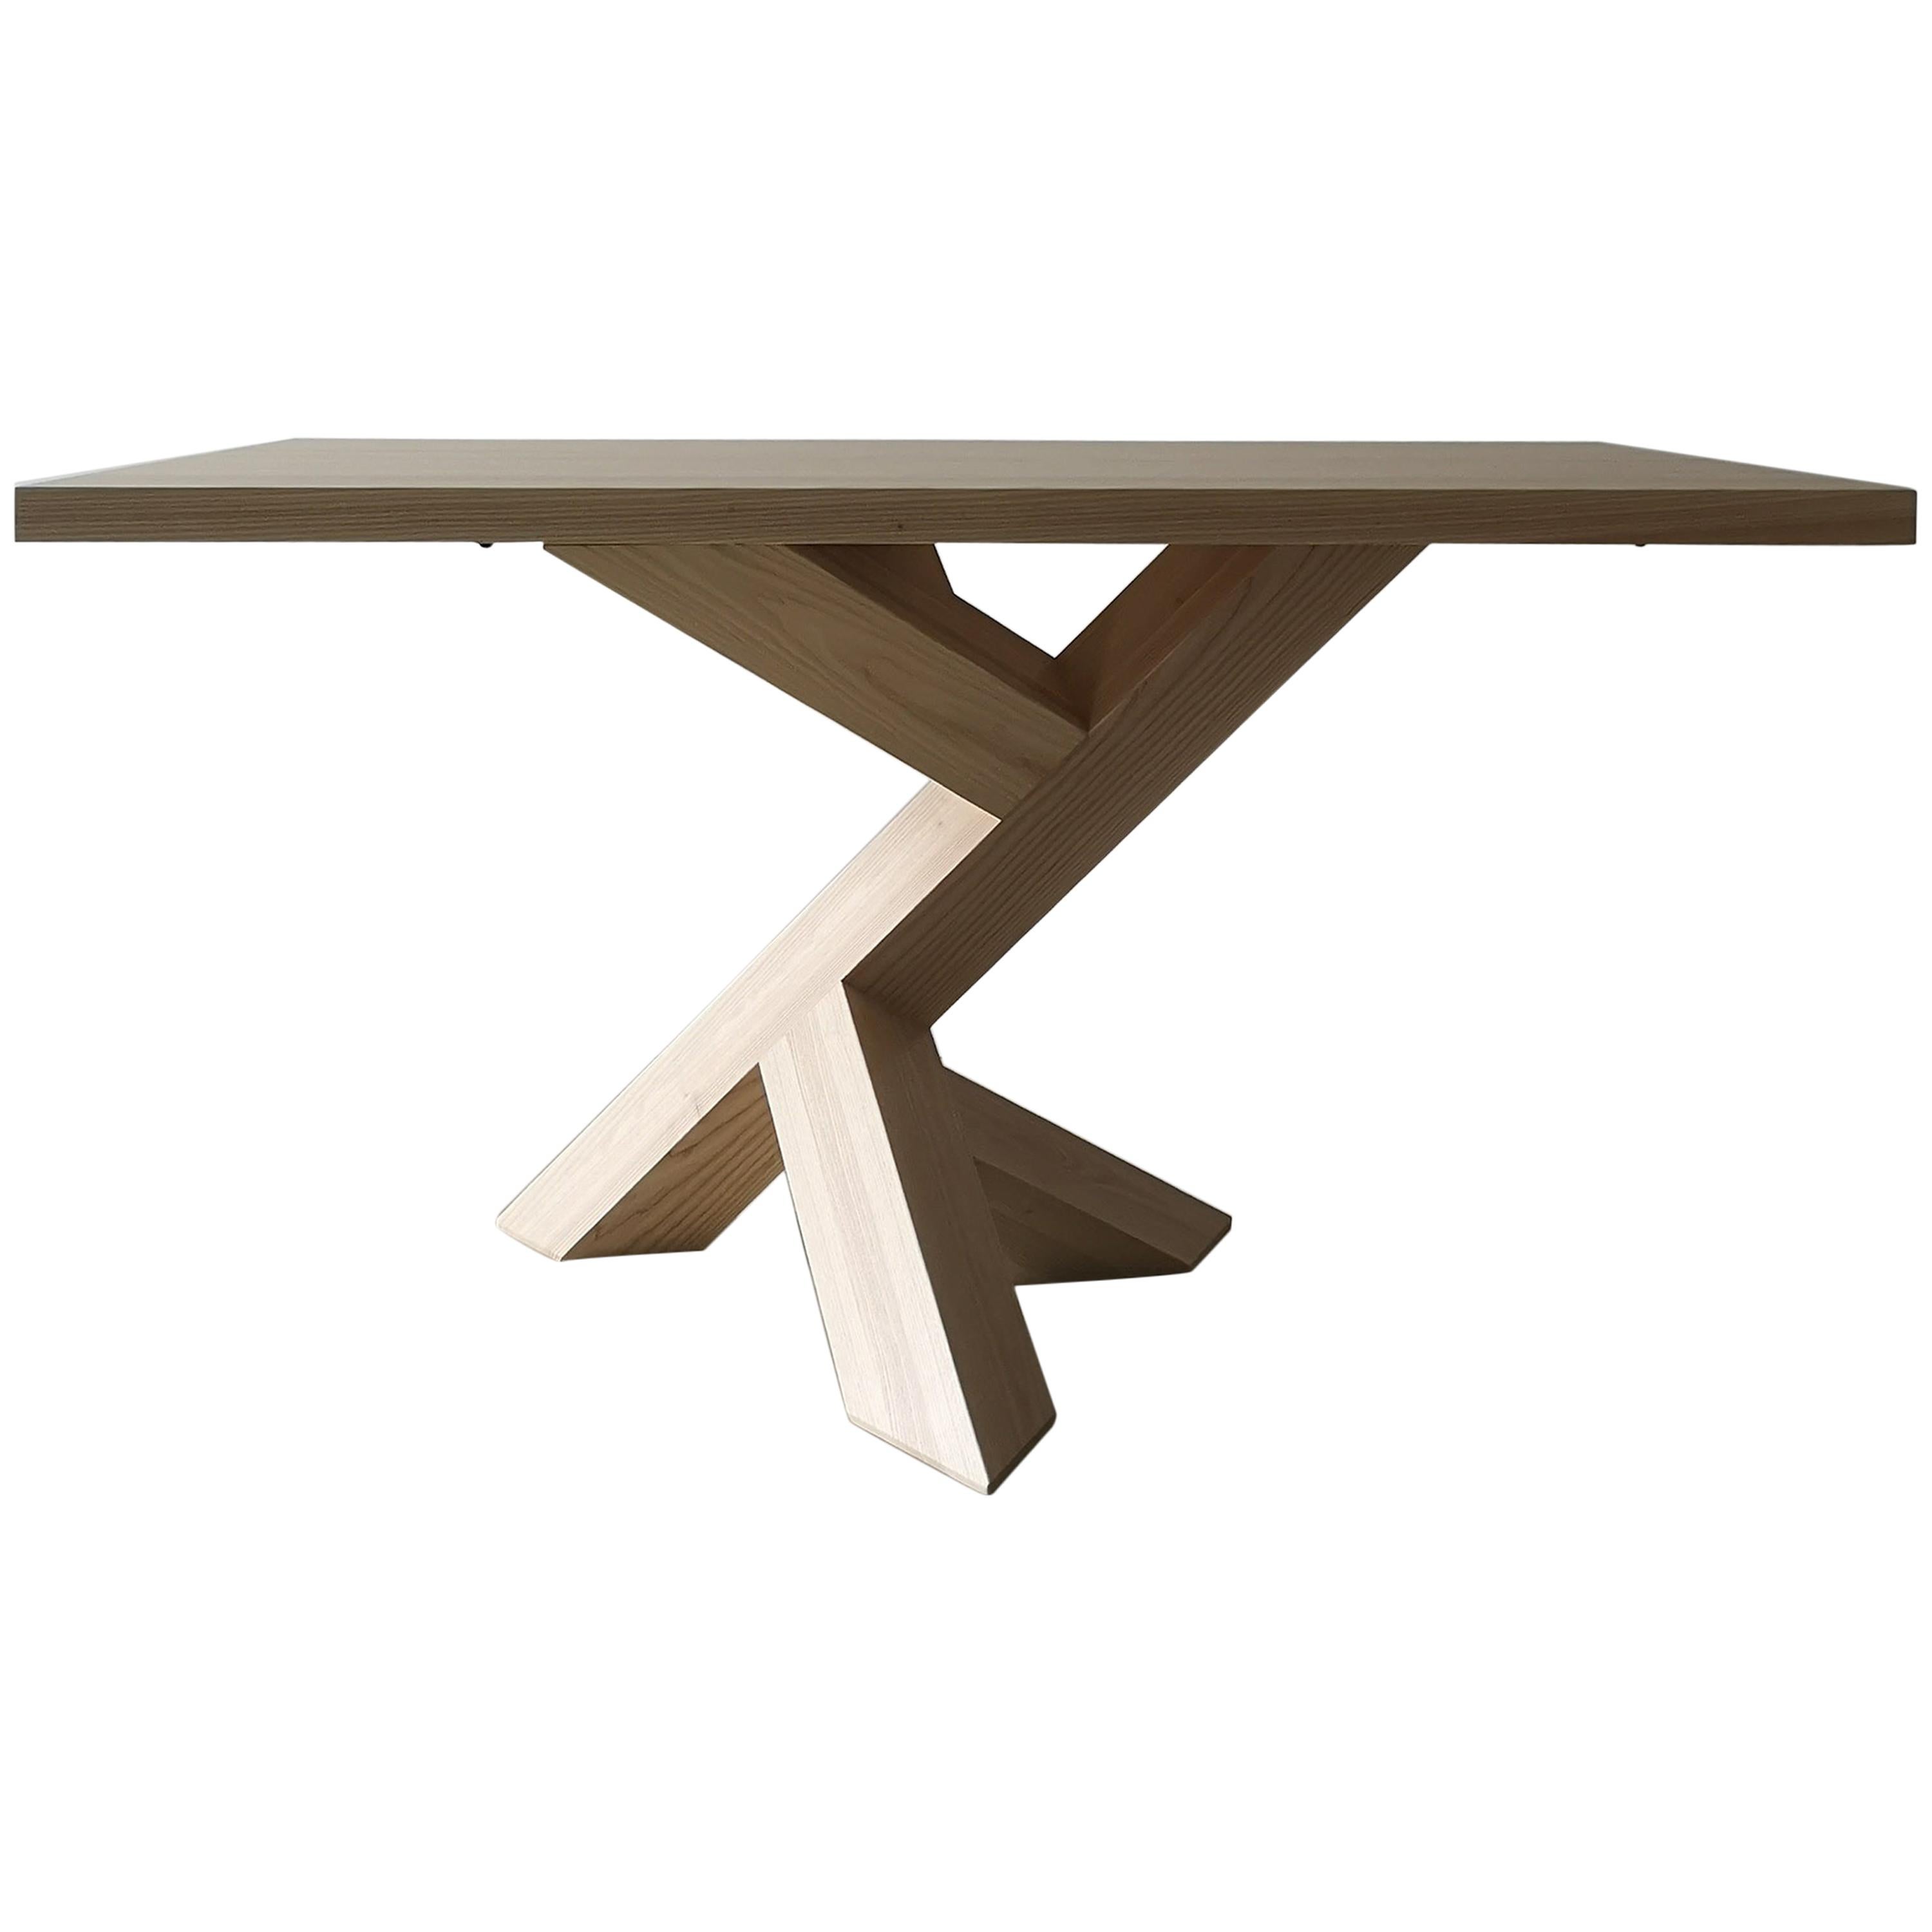 Iconoclast Solid Wood Pedestal Dining Table by Izm Design